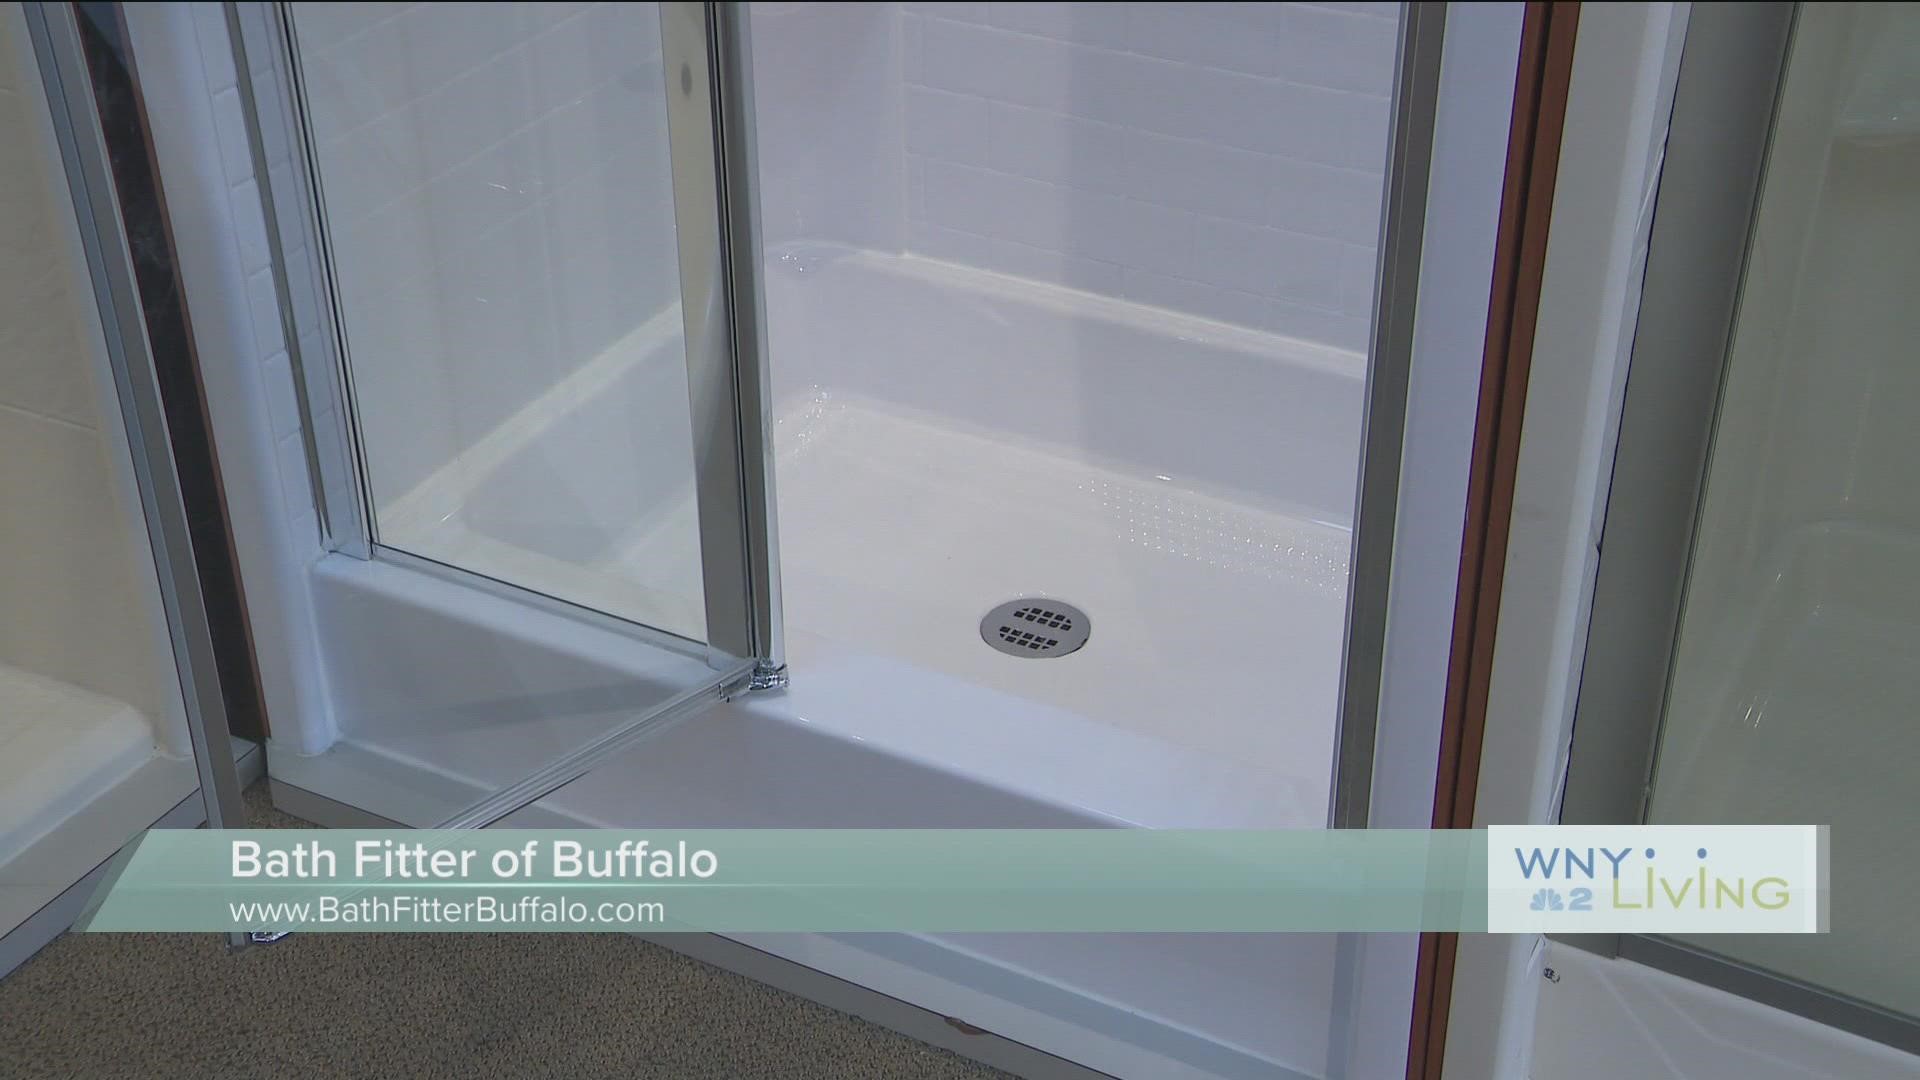 WNY Living - October 1 - Bath Fitter of Buffalo (THIS VIDEO IS SPONSORED BY BATH FITTER OF BUFFALO)